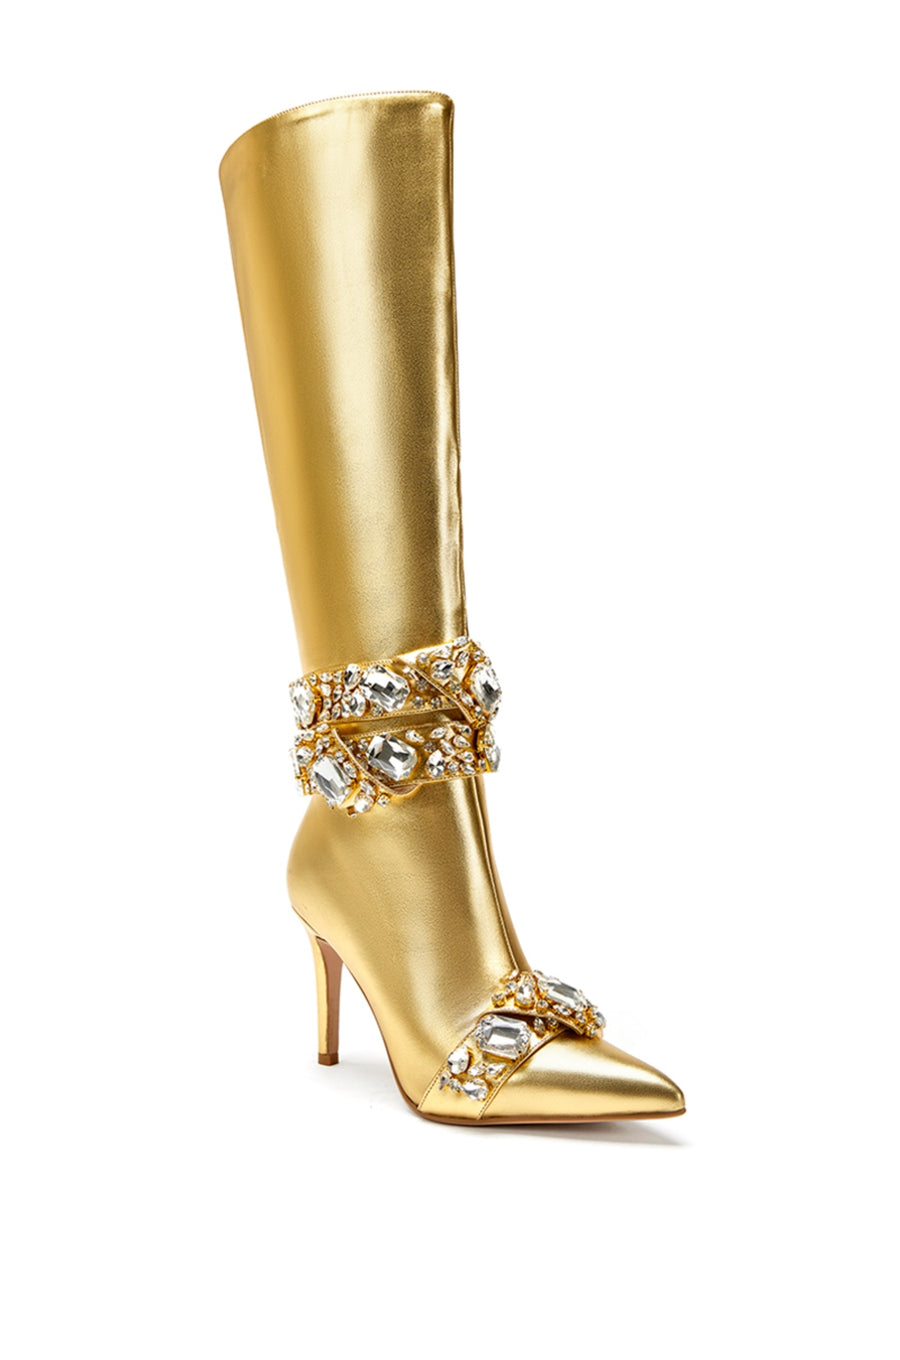 angled view of shiny metallic gold faux leather mid calf length boots with crystal rhinestone band accent on the ankle and on the front